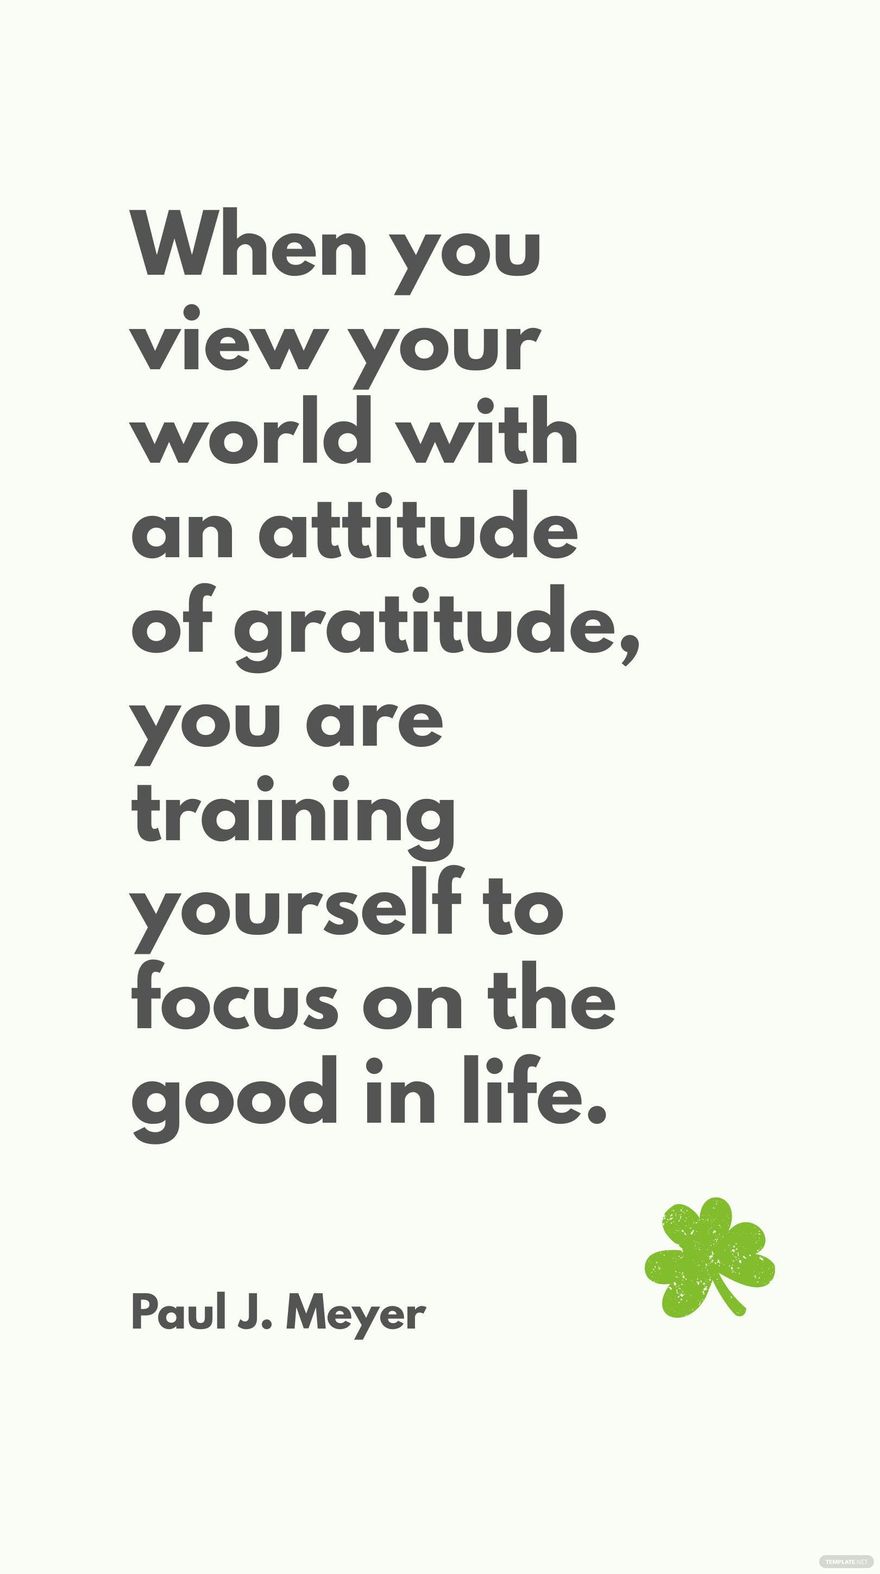 Free Paul J. Meyer - When you view your world with an attitude of gratitude, you are training yourself to focus on the good in life. in JPG